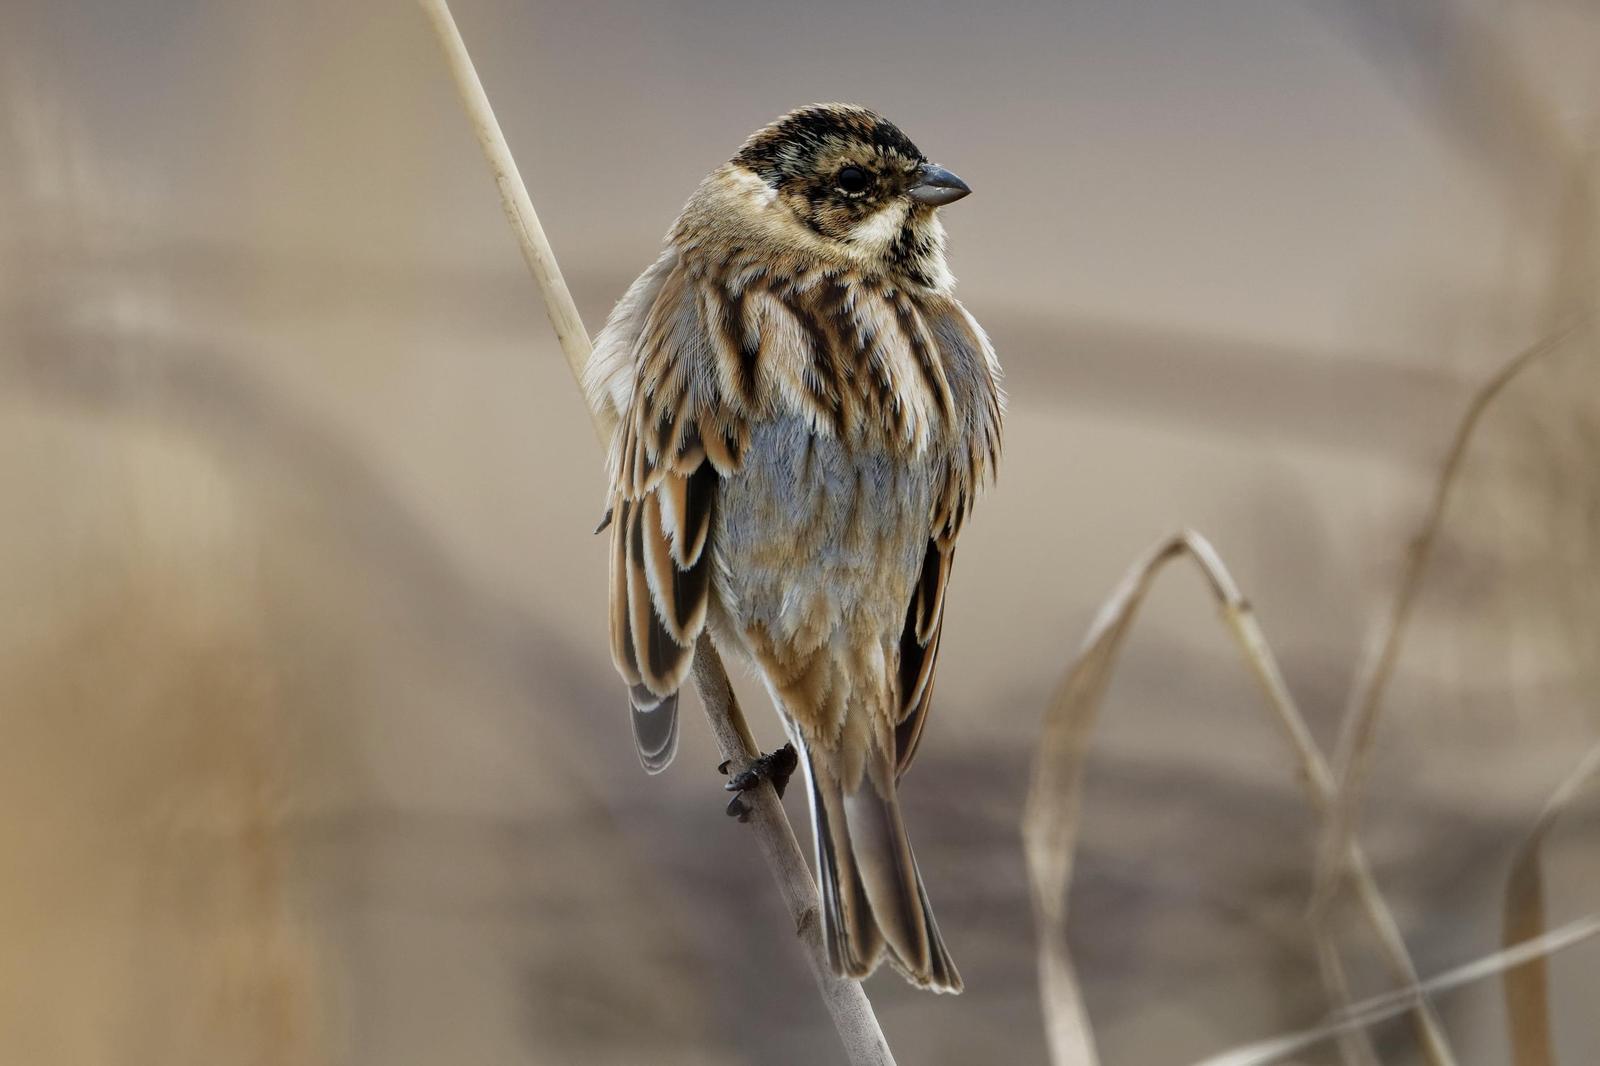 Reed Bunting Photo by Robert Cousins